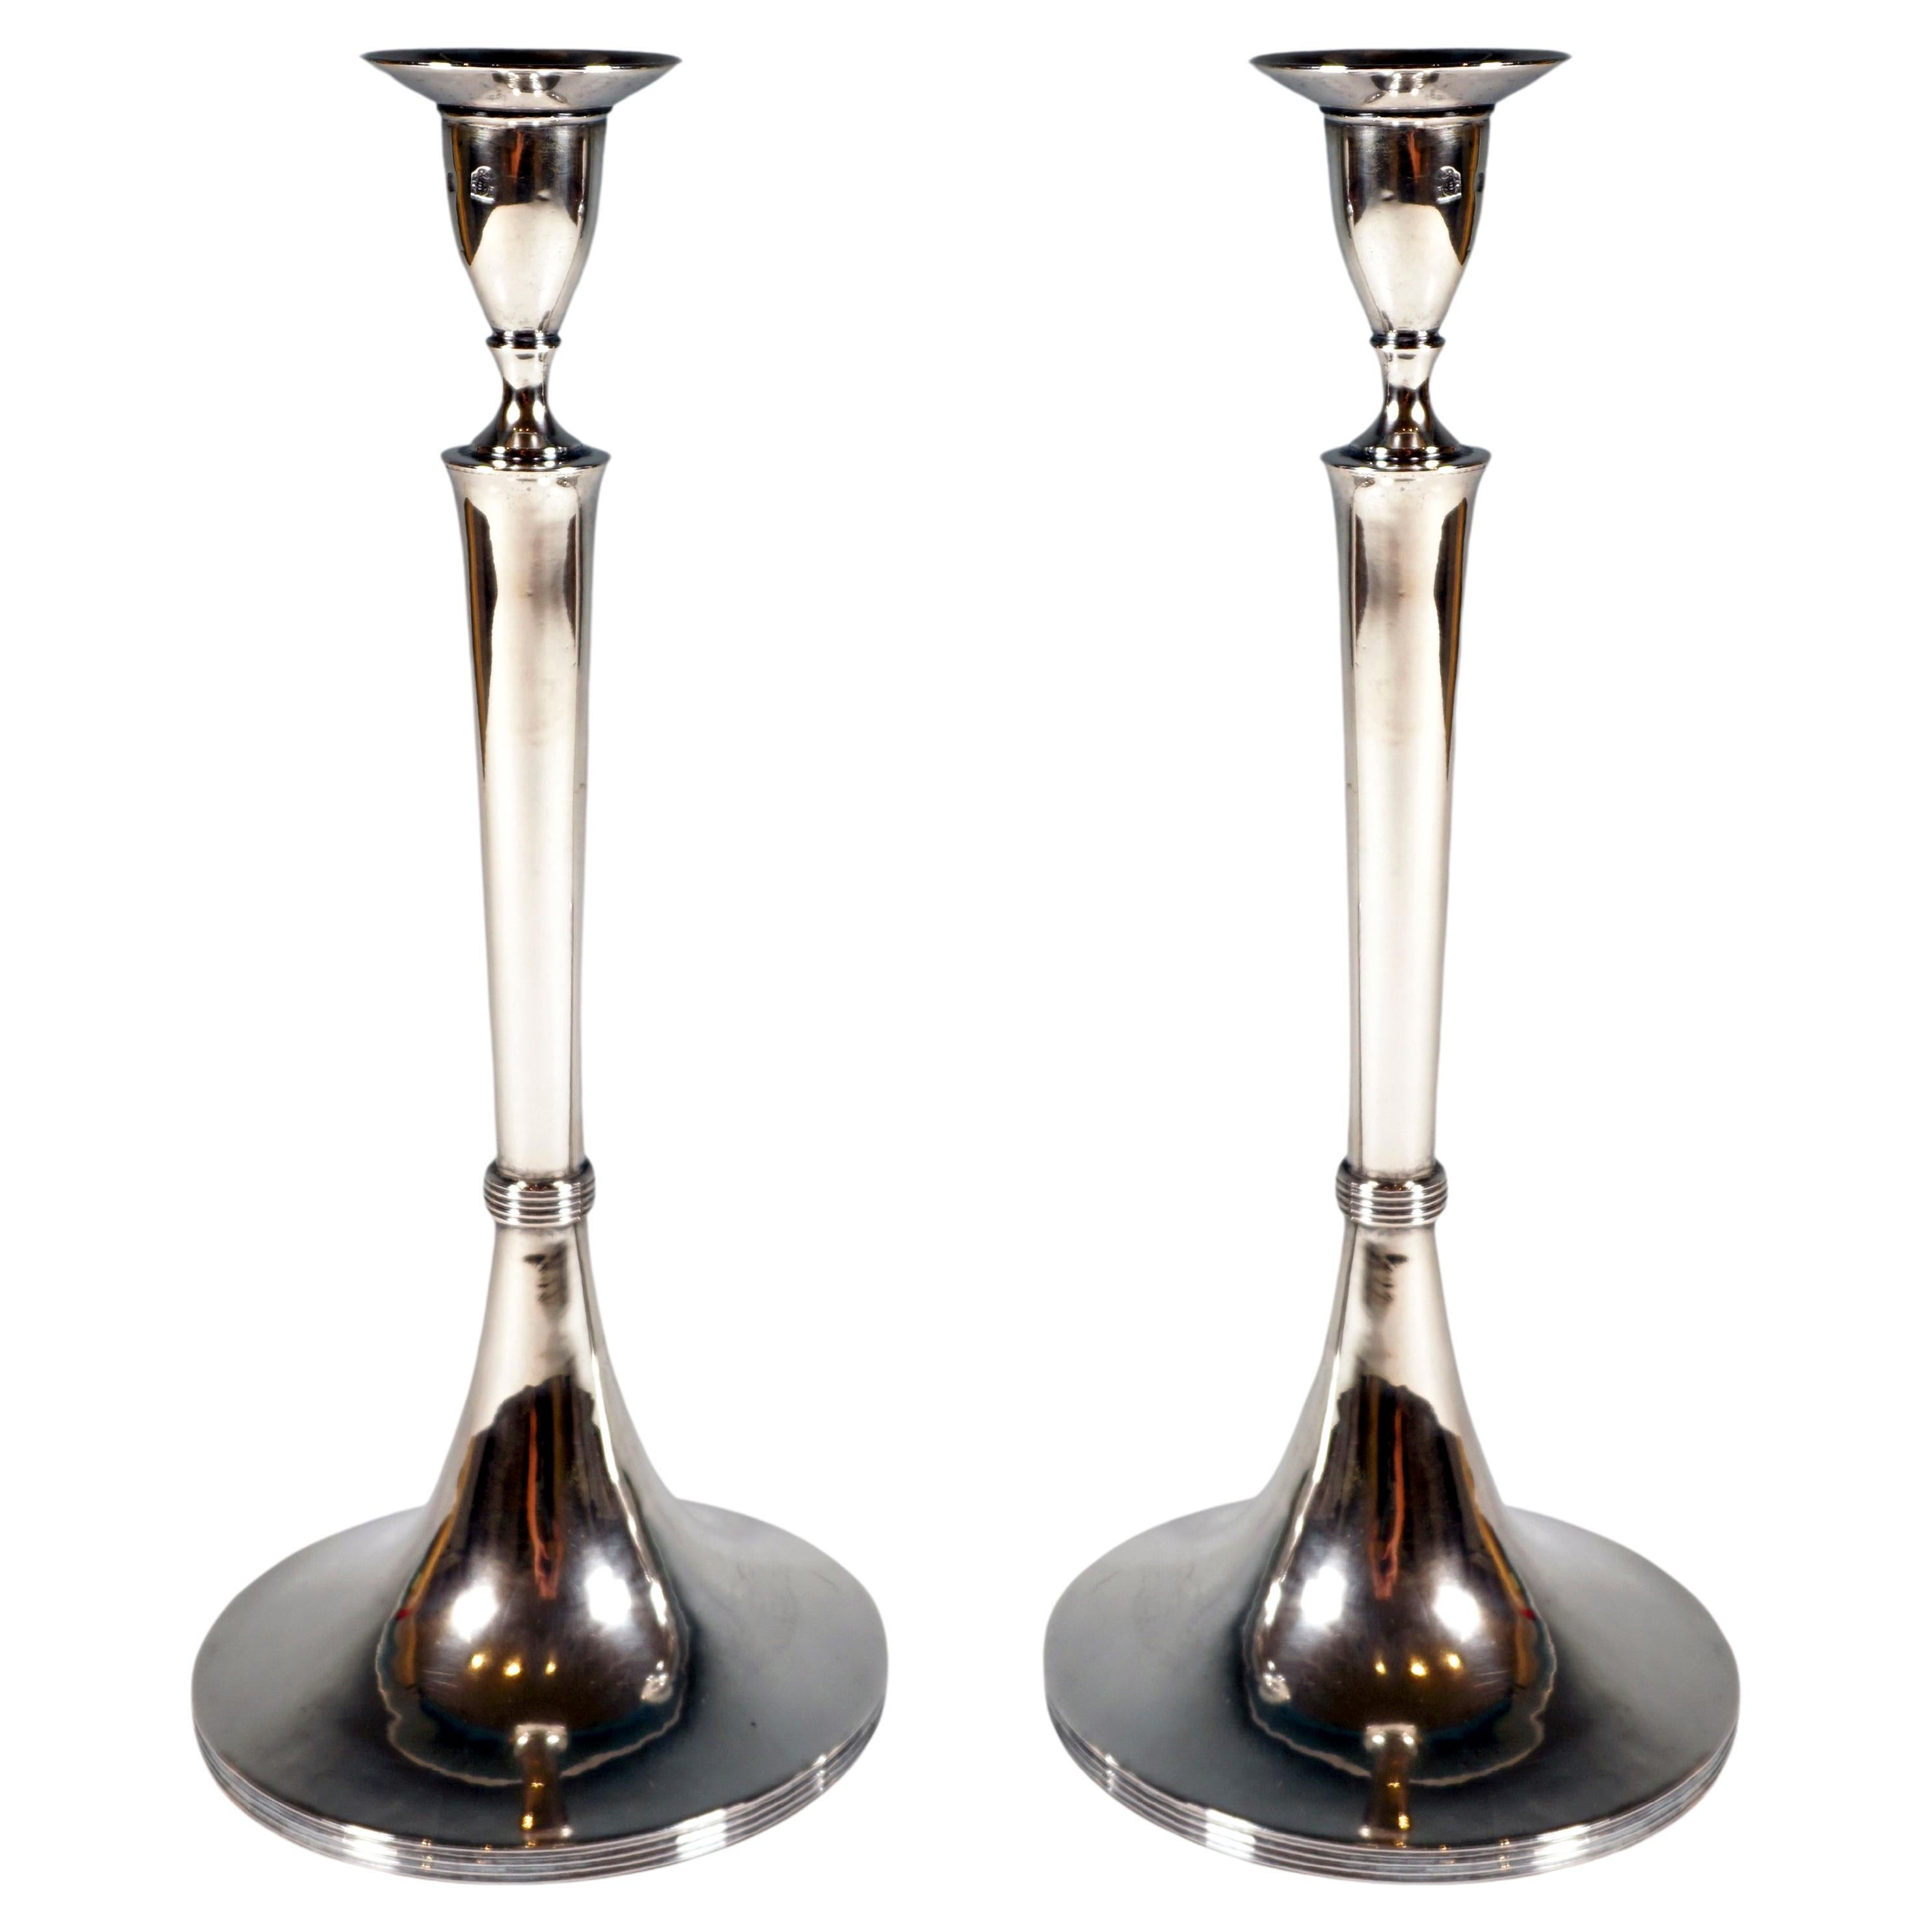 Pair Of Antique Empire Silver Candle Holders, Austria-Hungary, Dated 1821